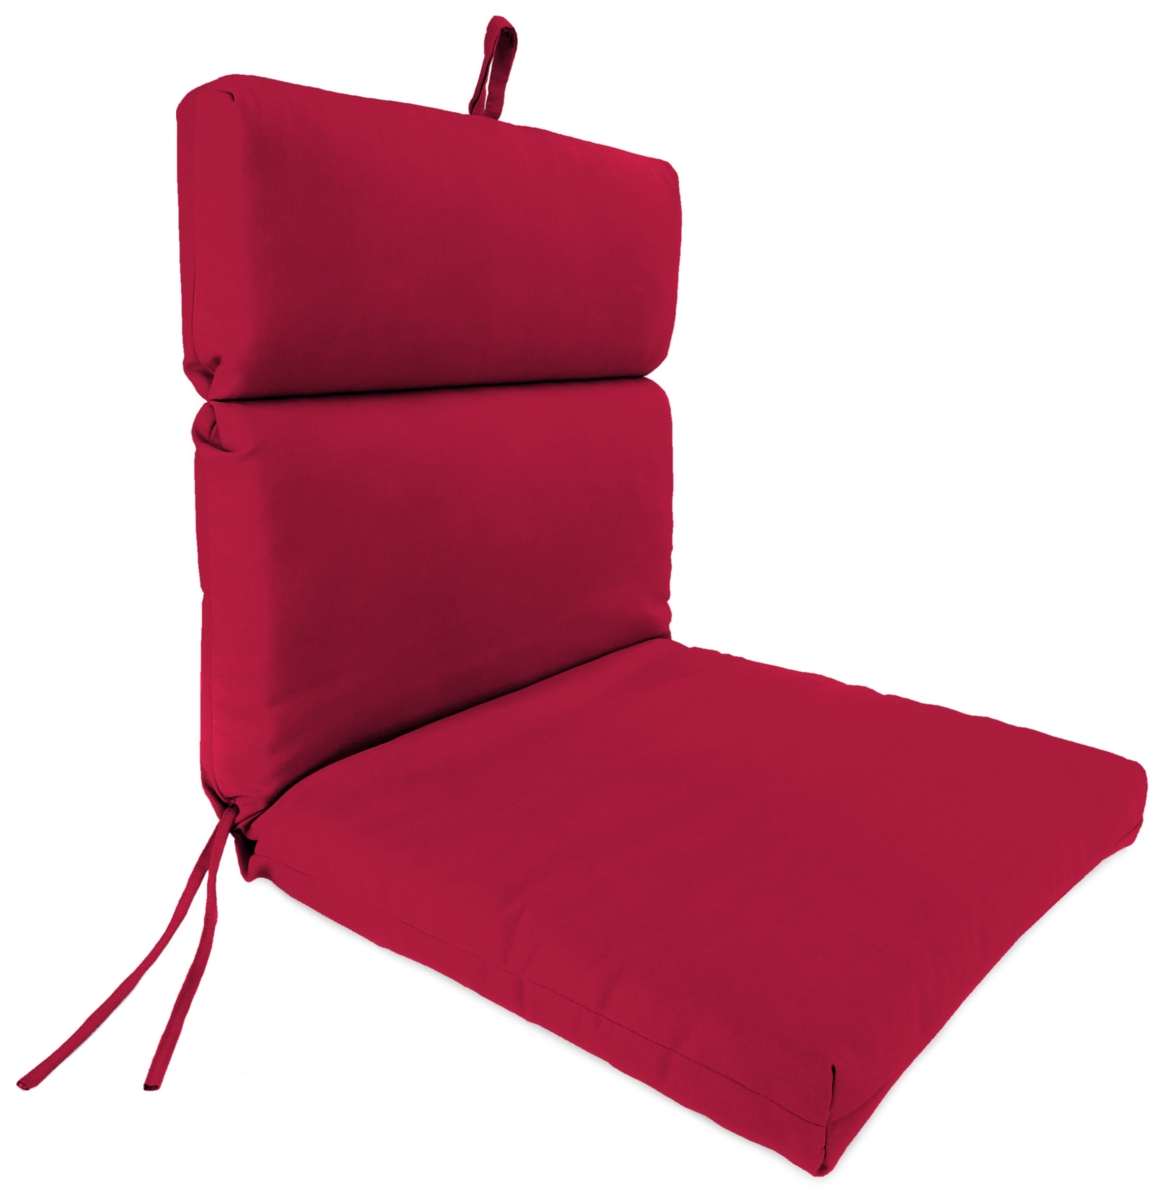 9502pk1-278c 22 X 44 X 4 In. Outdoor Chair Cushion In Pompeii Red